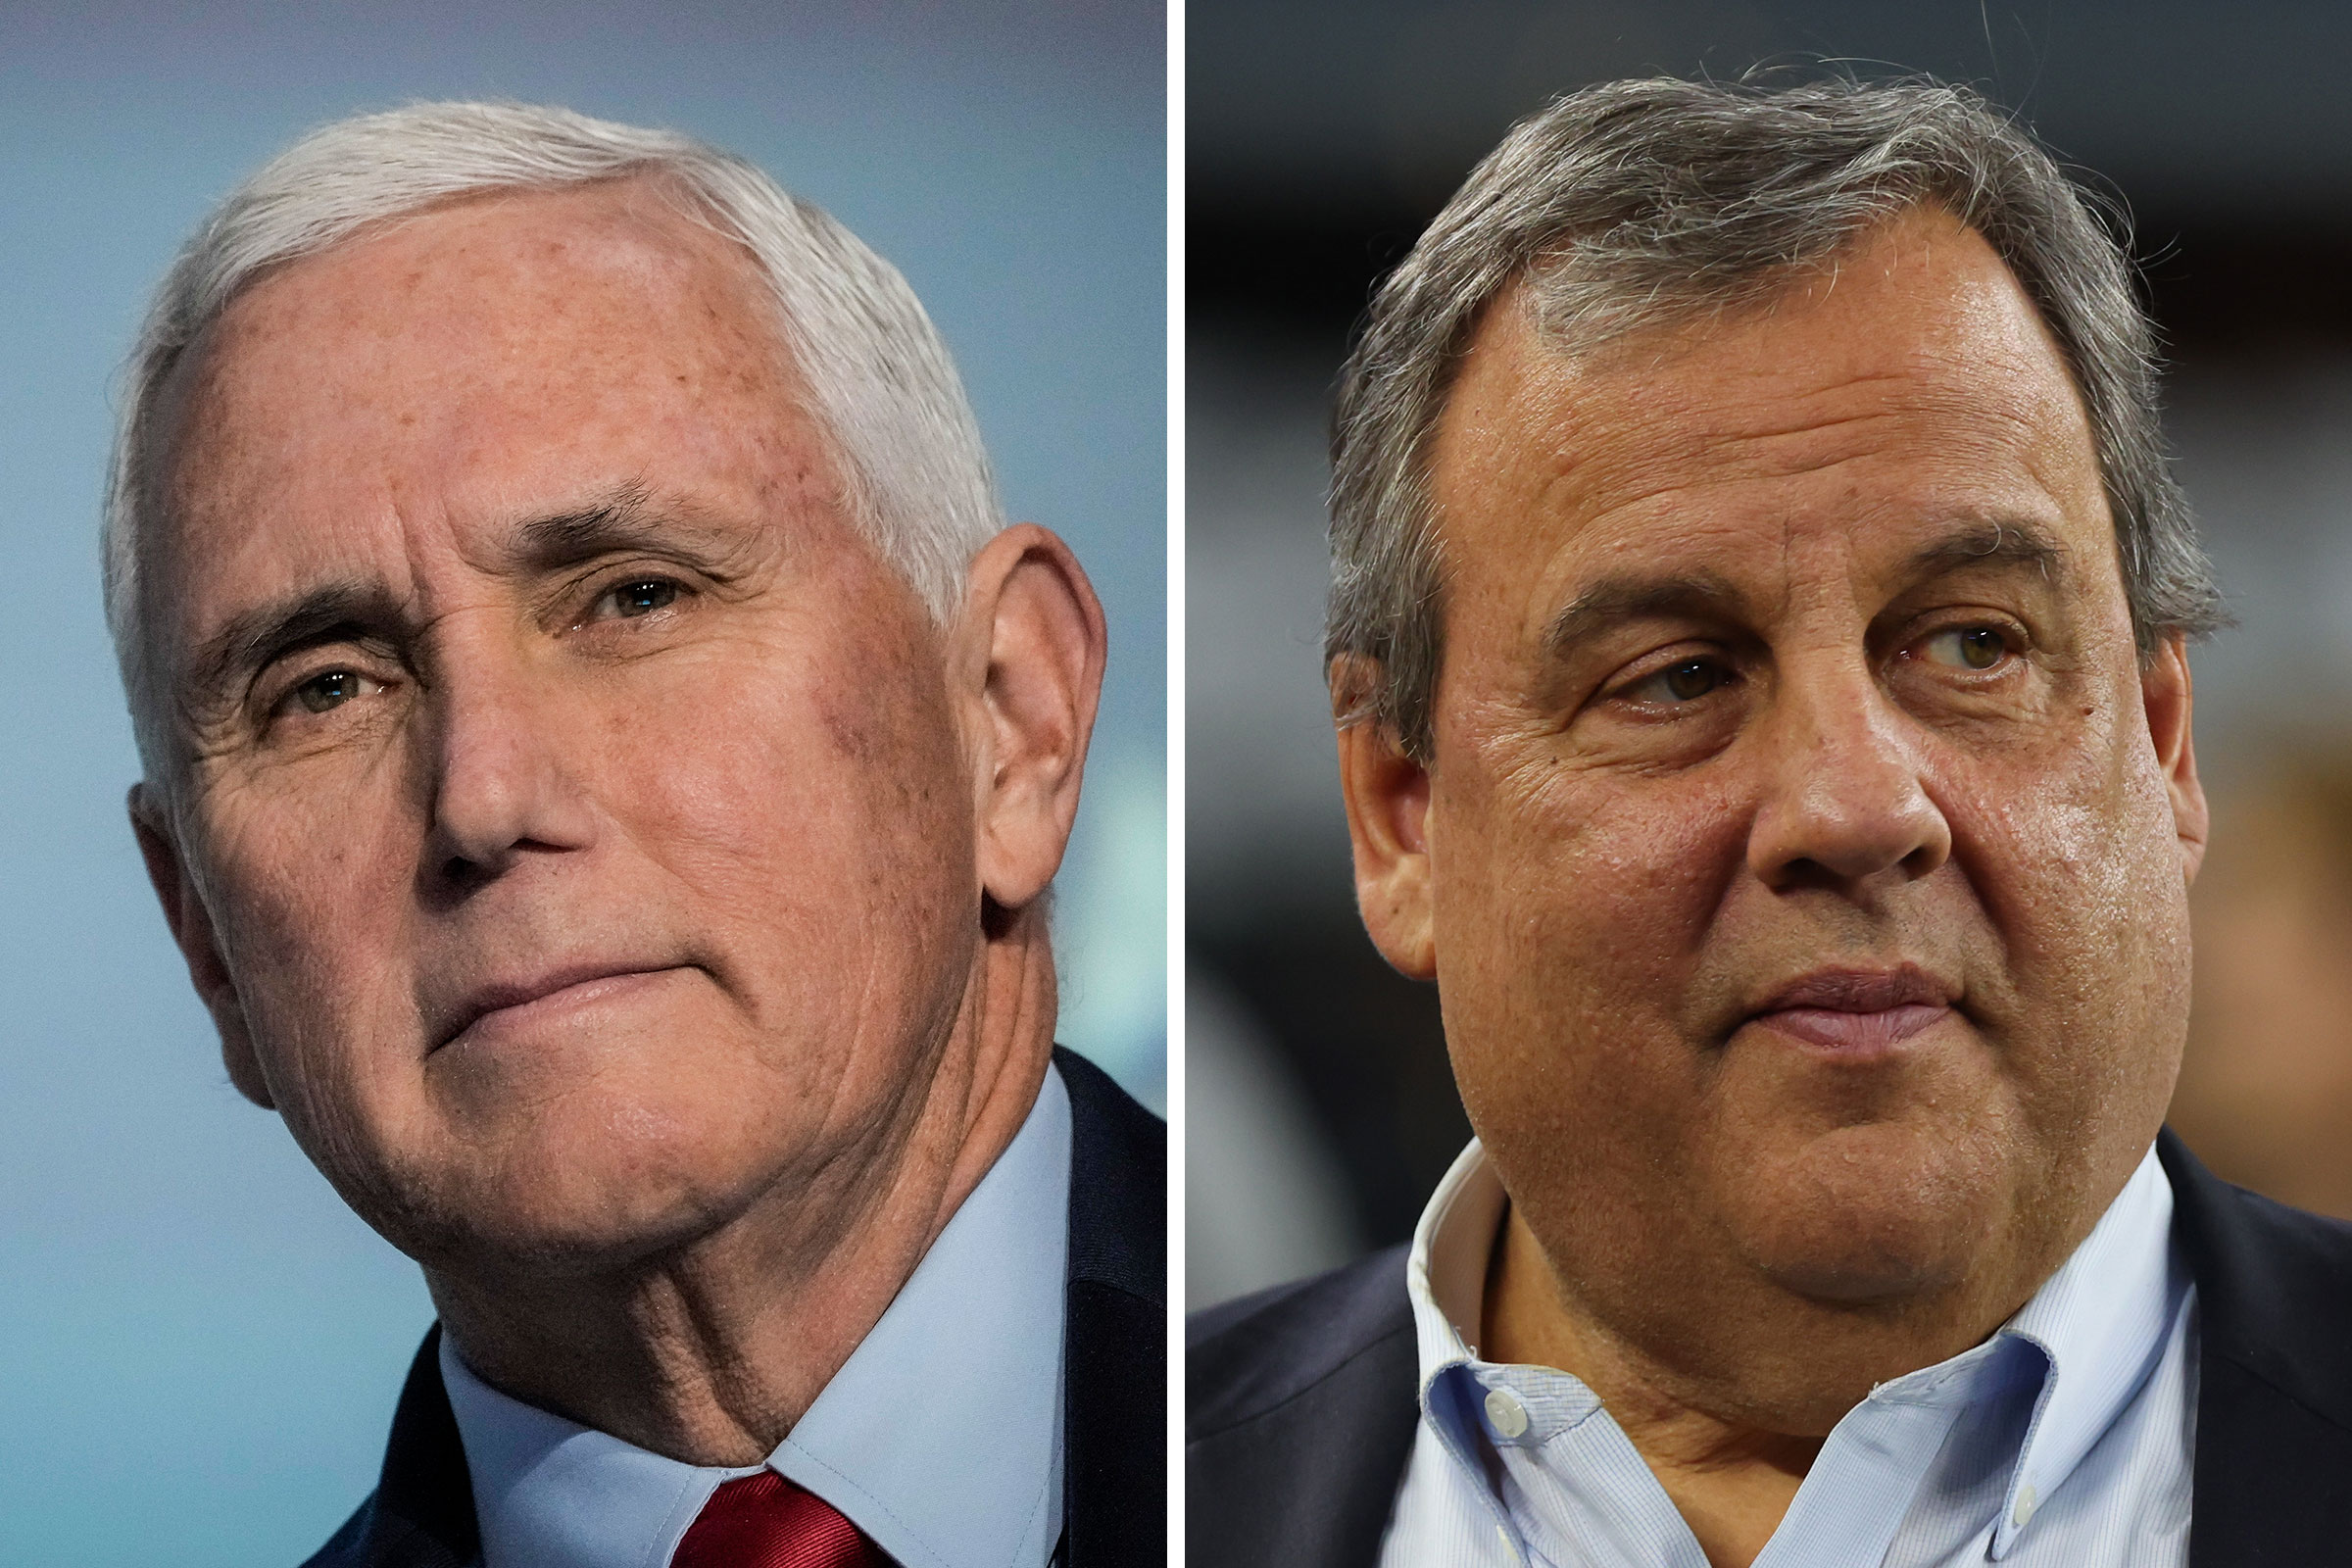 A side by side pairing of images showing former Vice President Mike Pence on the left and Former New Jersey Governor Chris Christie on the right, both have neutral expressions and are looking off in different directions